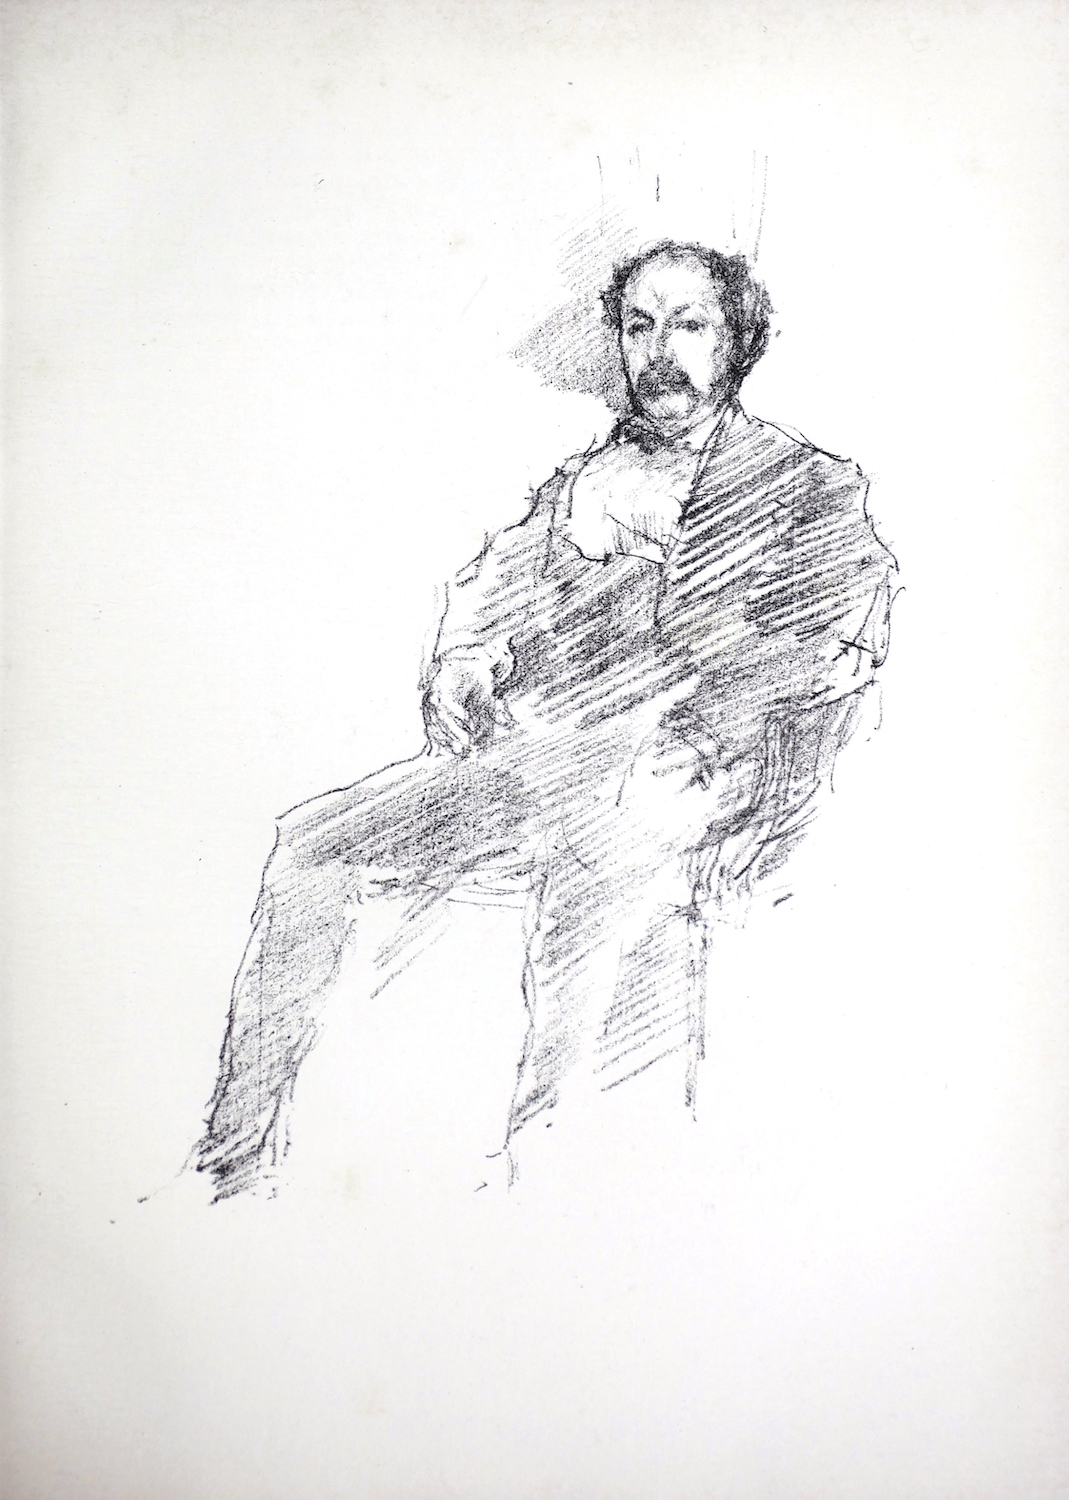 The unframed image, which features a man sitting on a chair and looking forward, has no background detail. The man is positioned off centre, with his back on the right side of the image and his feet pointing to the left. The man is wearing a suit, but the details are intentionally vague, sketched roughly by the artist. His right hand is visible on his lap, but the fingers on his left hand are not drawn, and his legs are likewise left unfinished, without feet. The man has a mustache, thick hair on the sides of his head and thinning hair on the crown. No setting is provided. The title indicates that the portrait is of the artist’s brother, Dr. William McNeil Whistler (1836-1900).